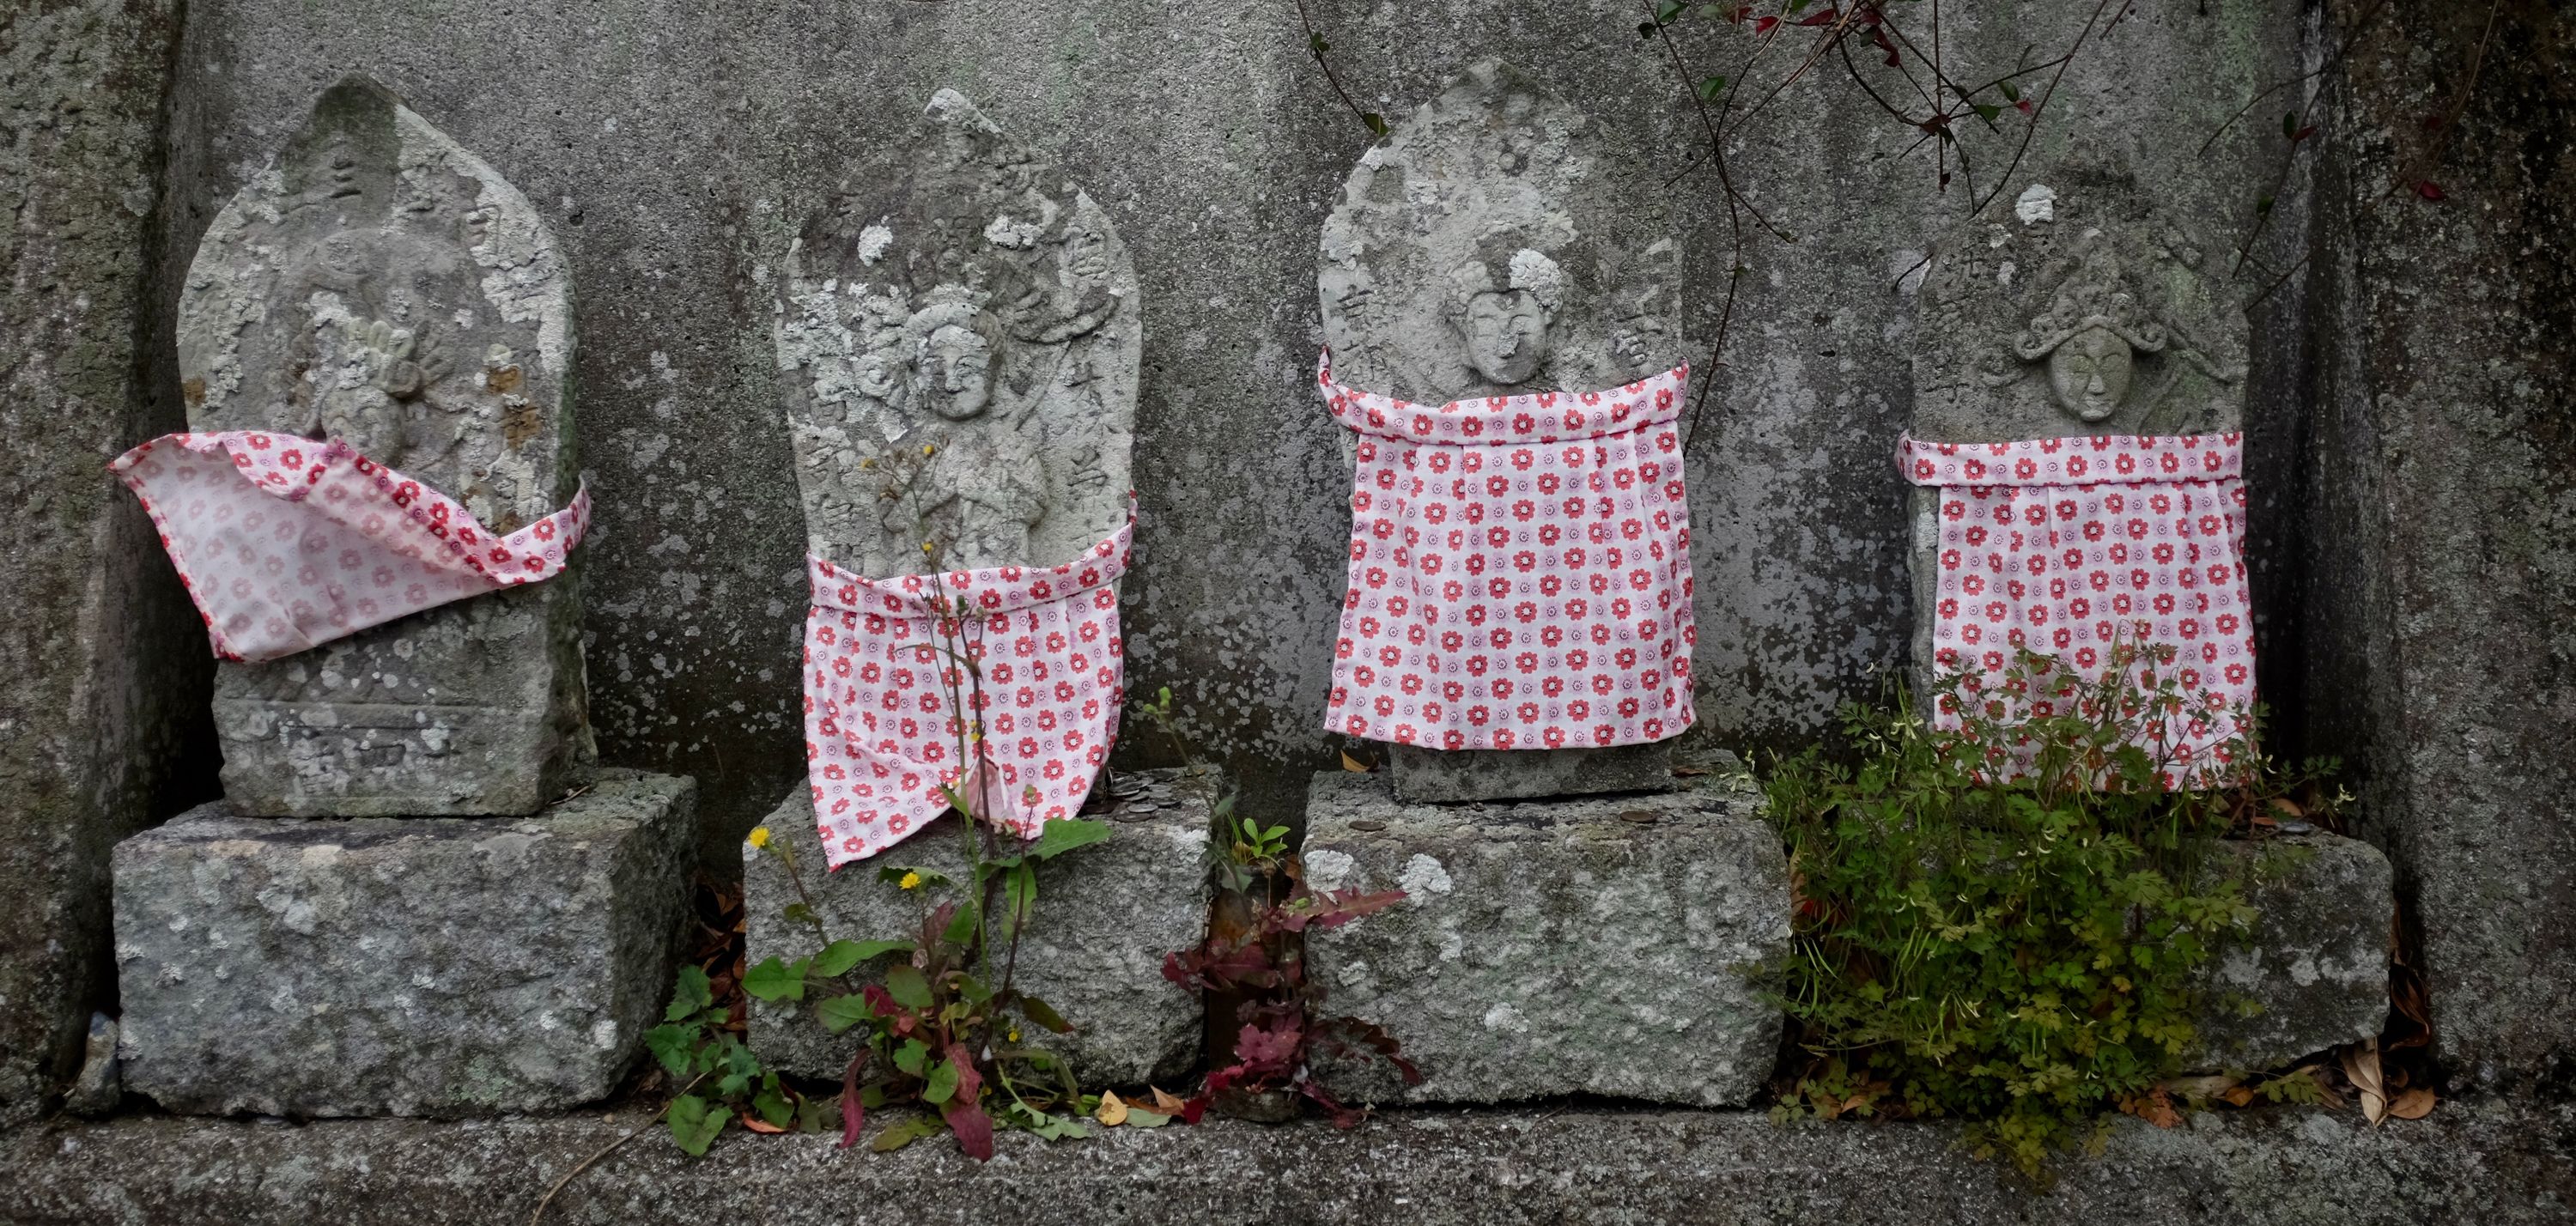 Four small roadside Buddhist statues wearing aprons, with the apron of one flipped up by the wind.